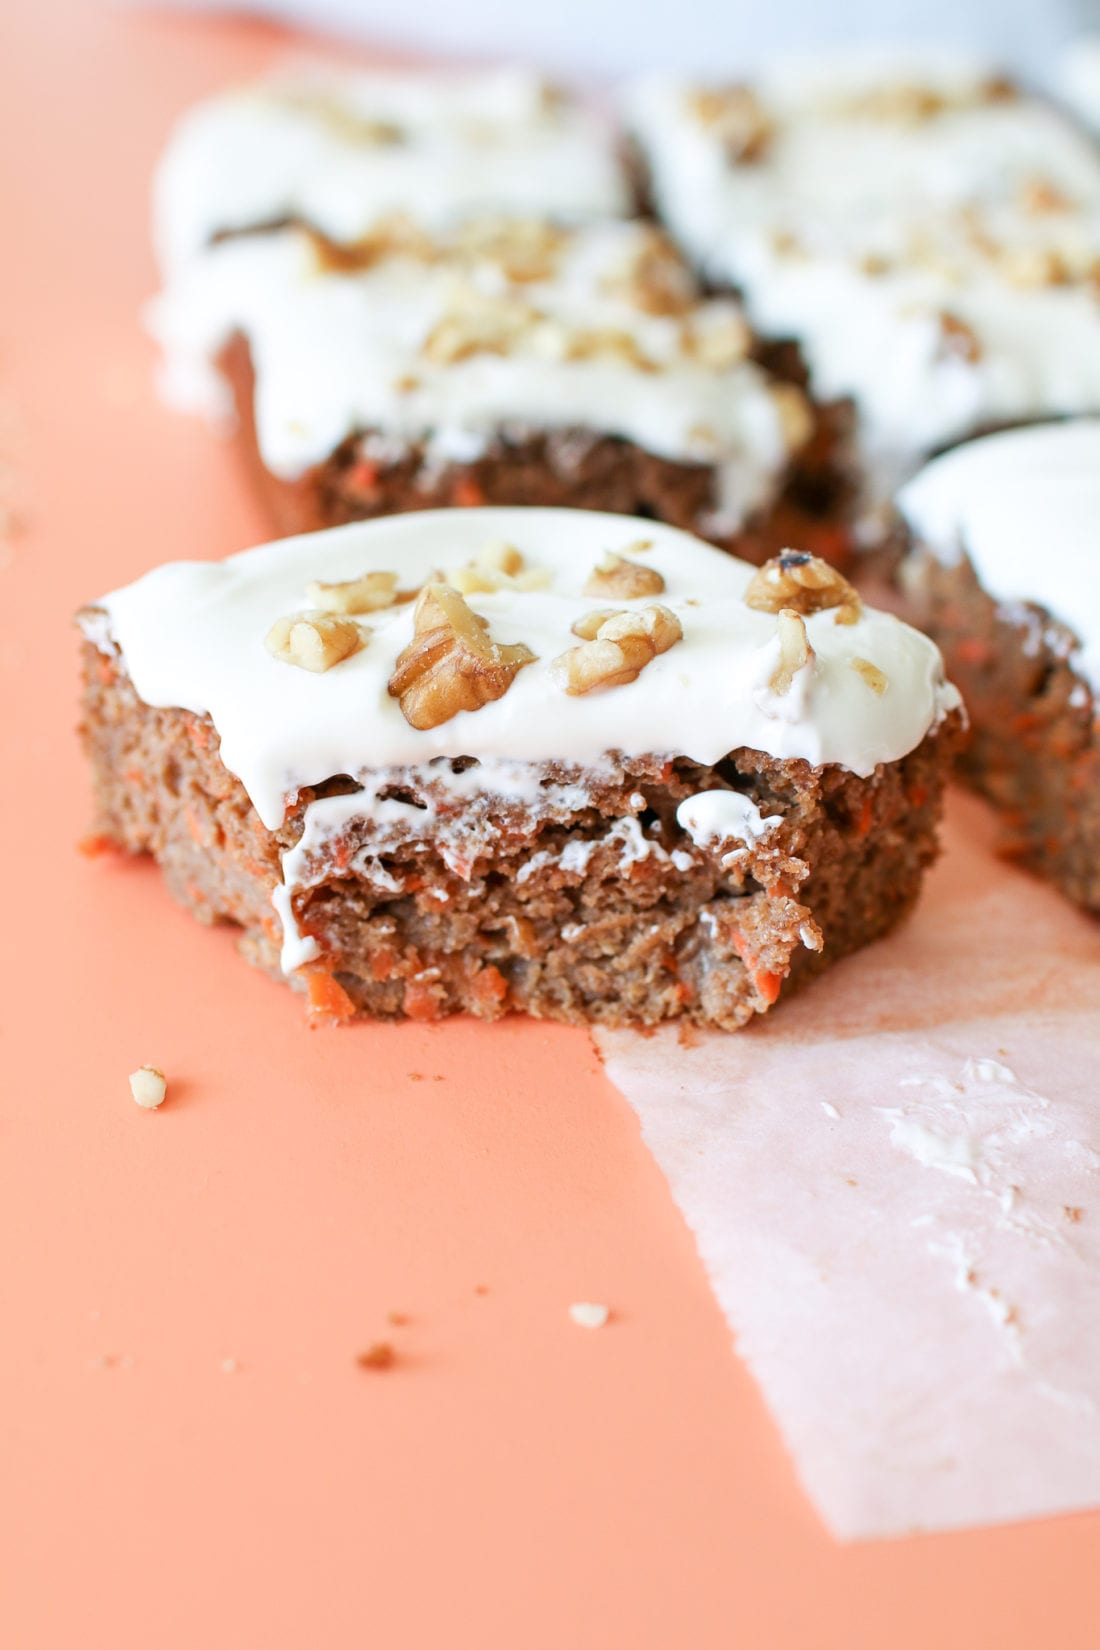 A healthy carrot cake, naturally sweetened with applesauce and maple syrup, loaded with freshly grated carrots, warming spices, topped with a honey cream cheese frosting and crunchy walnuts.